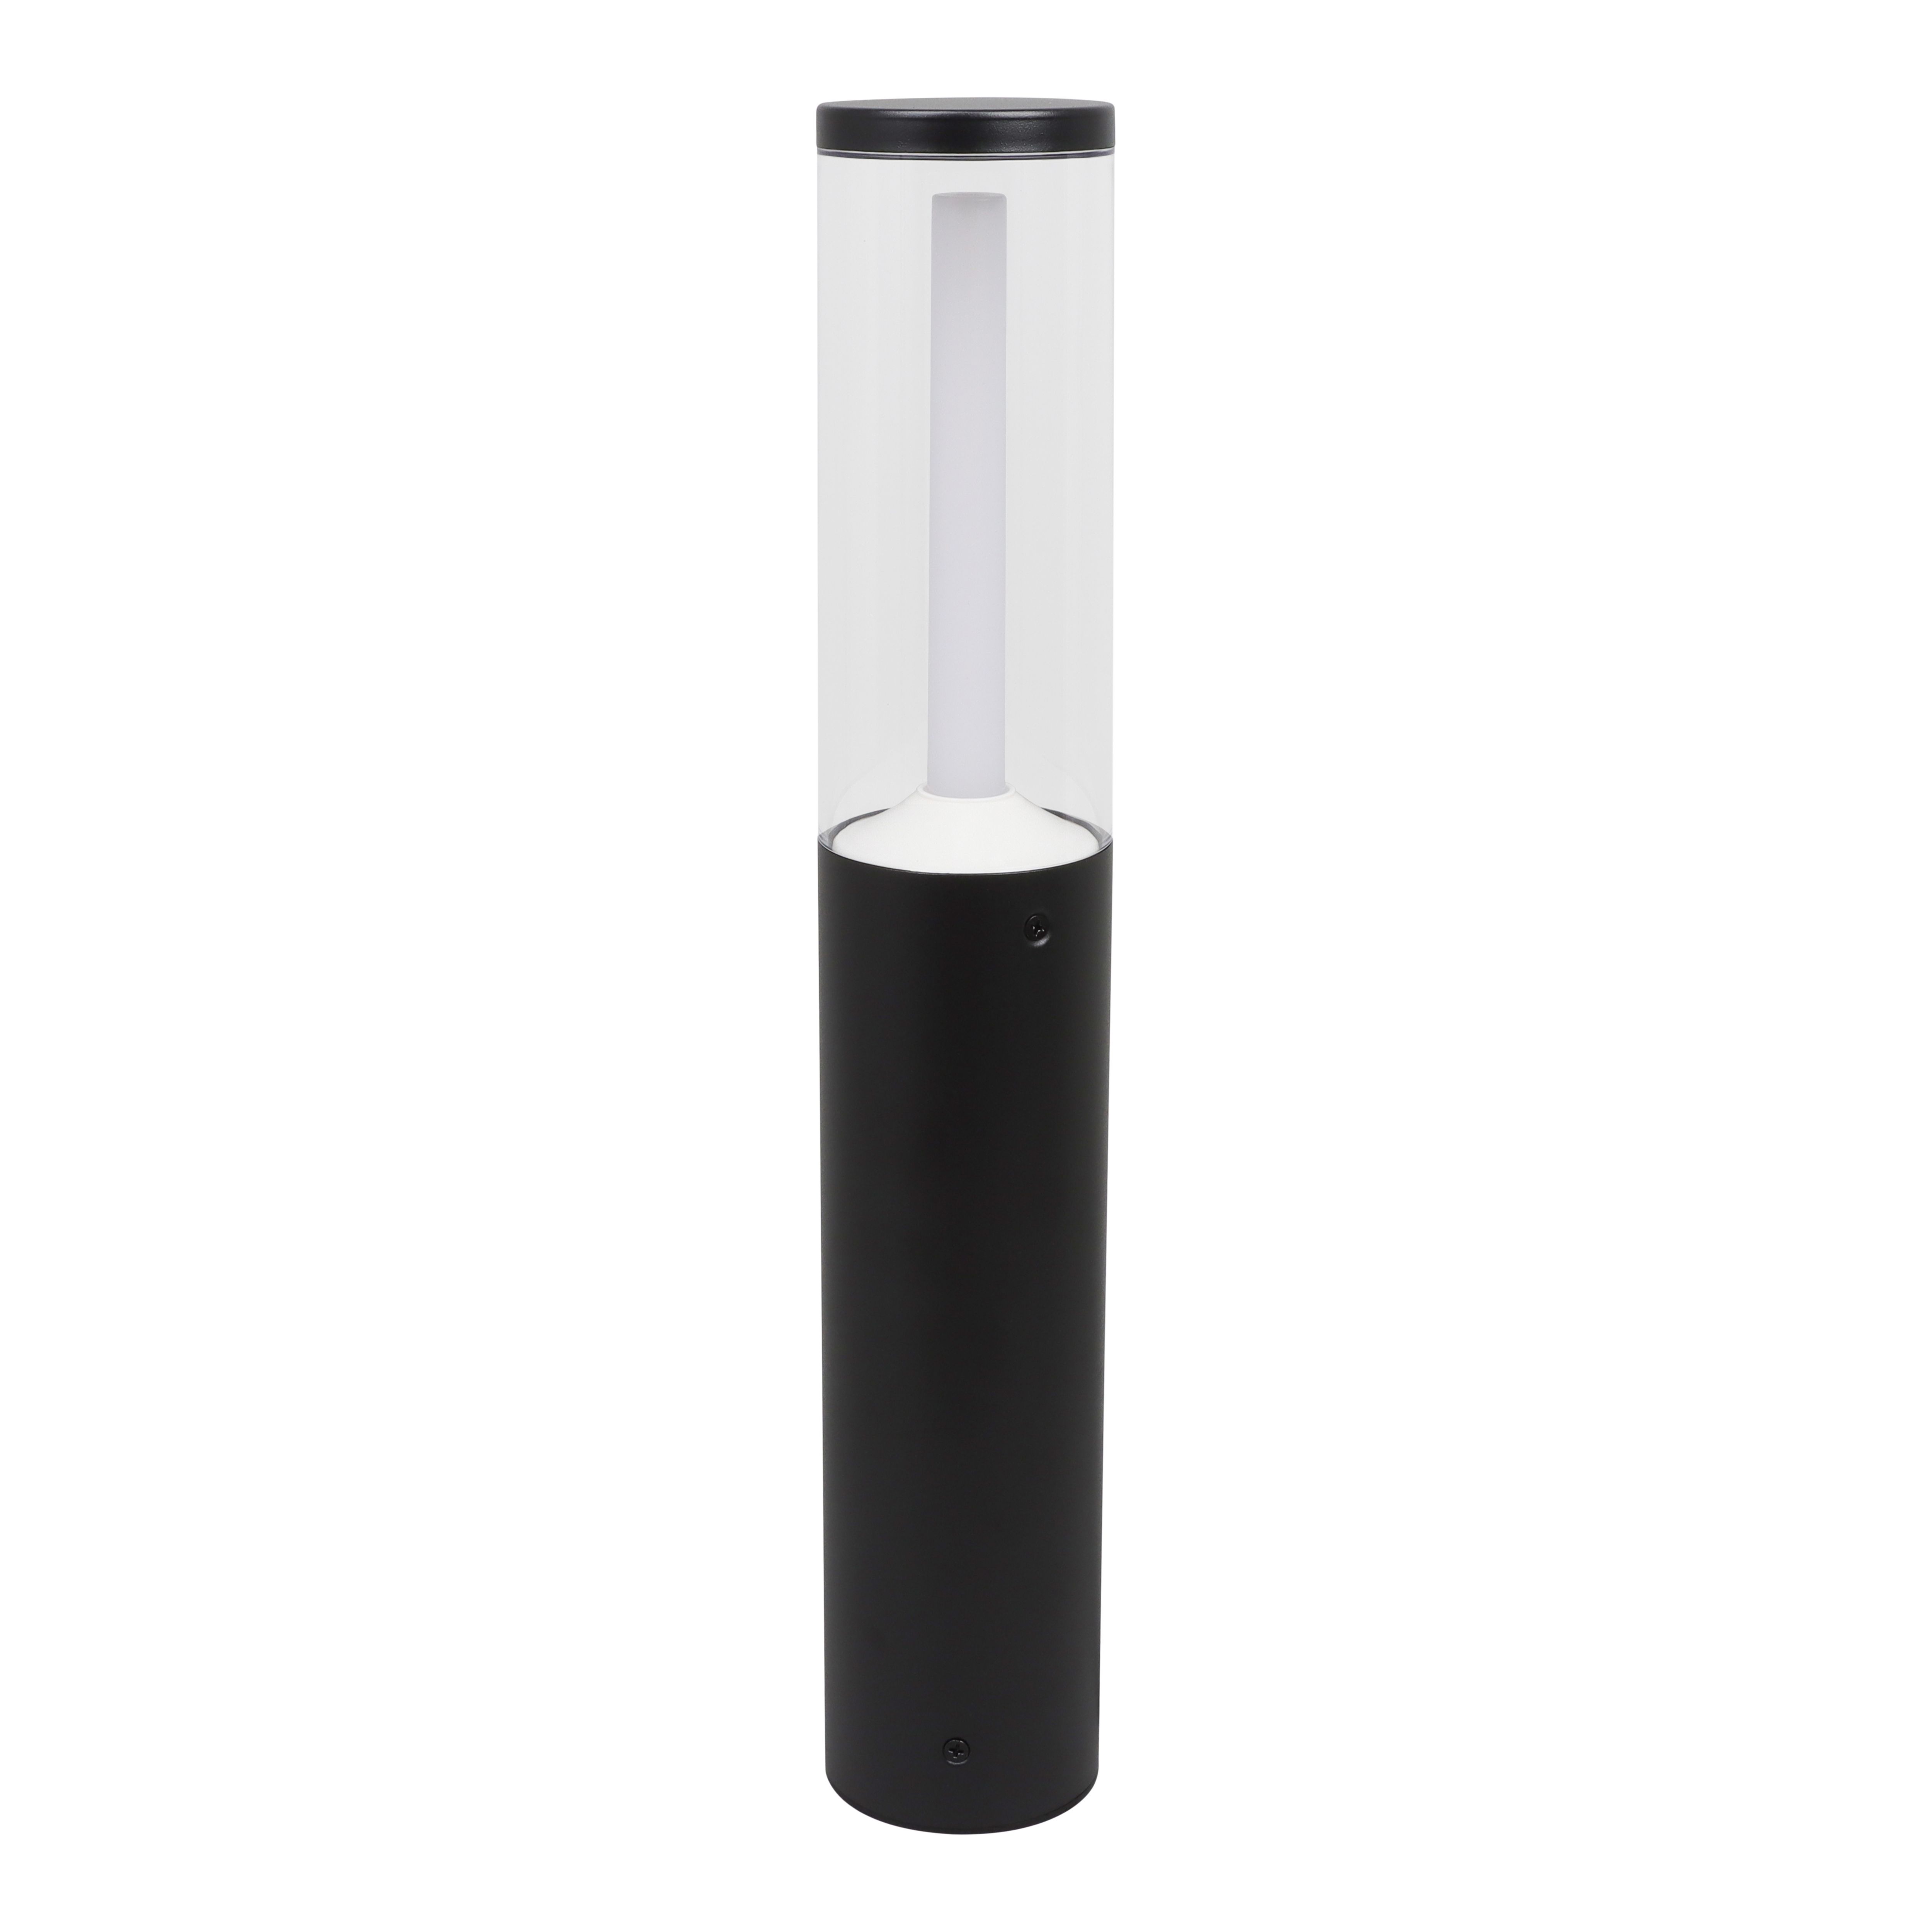 GoodHome Trinidad Black Mains-powered (wired) 1 lamp Integrated LED Outdoor Post light (H)450mm